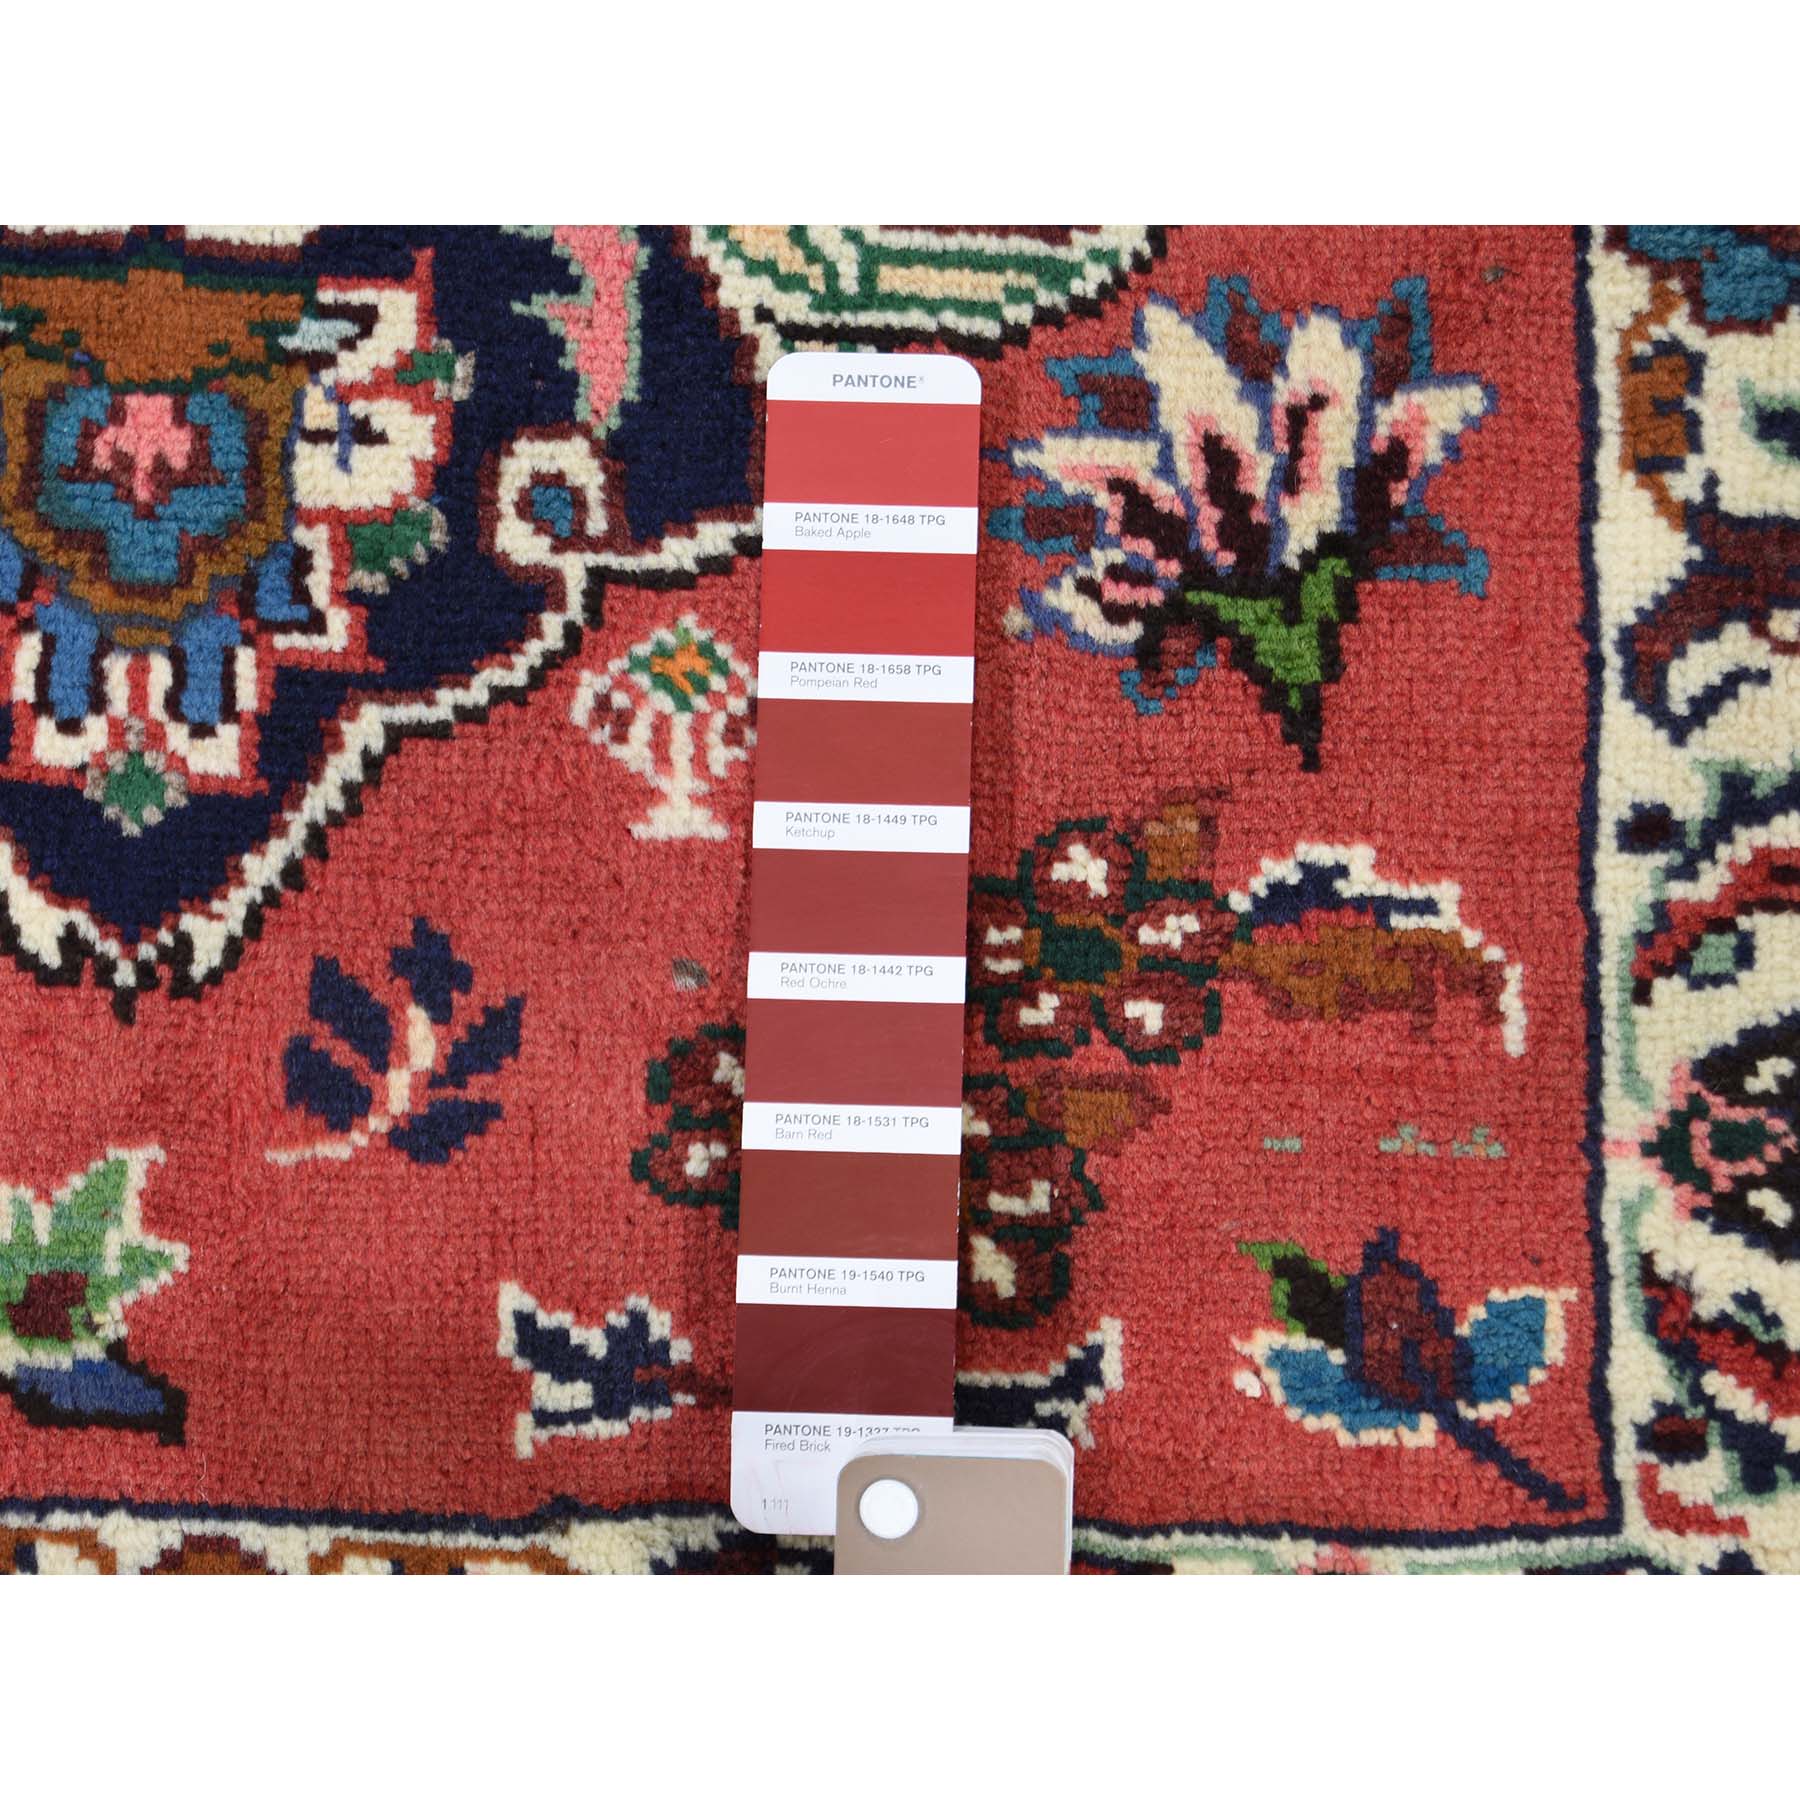 2-6 x3-9  Persian Karabakh Pure Wool Hand-Knotted Oriental Rug 